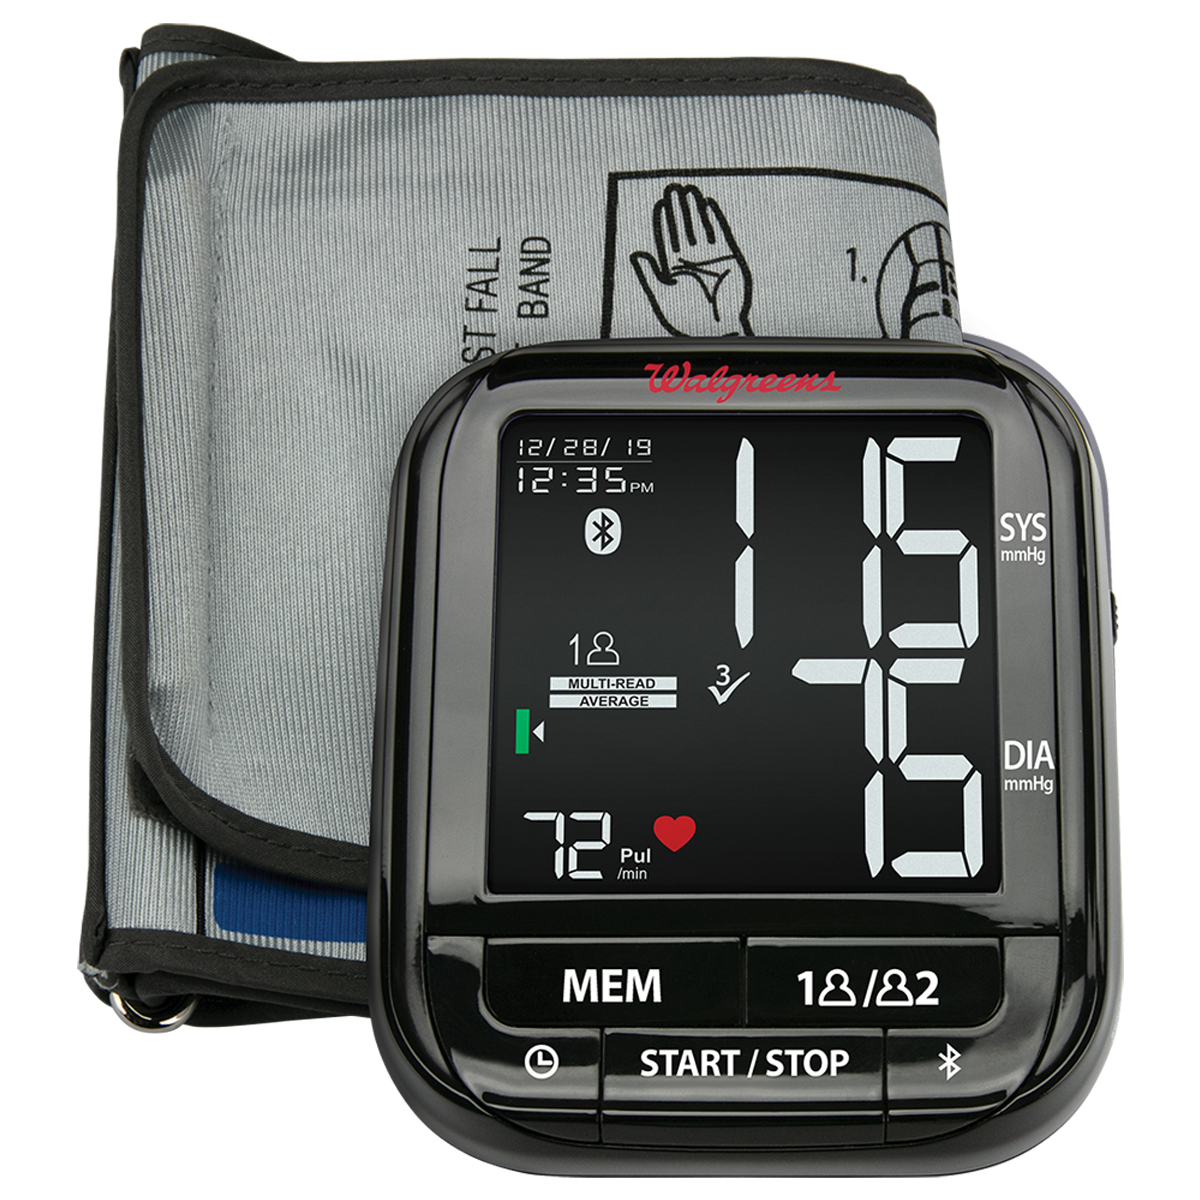 WGNBPA-240BT Arm Blood Pressure Monitor package view